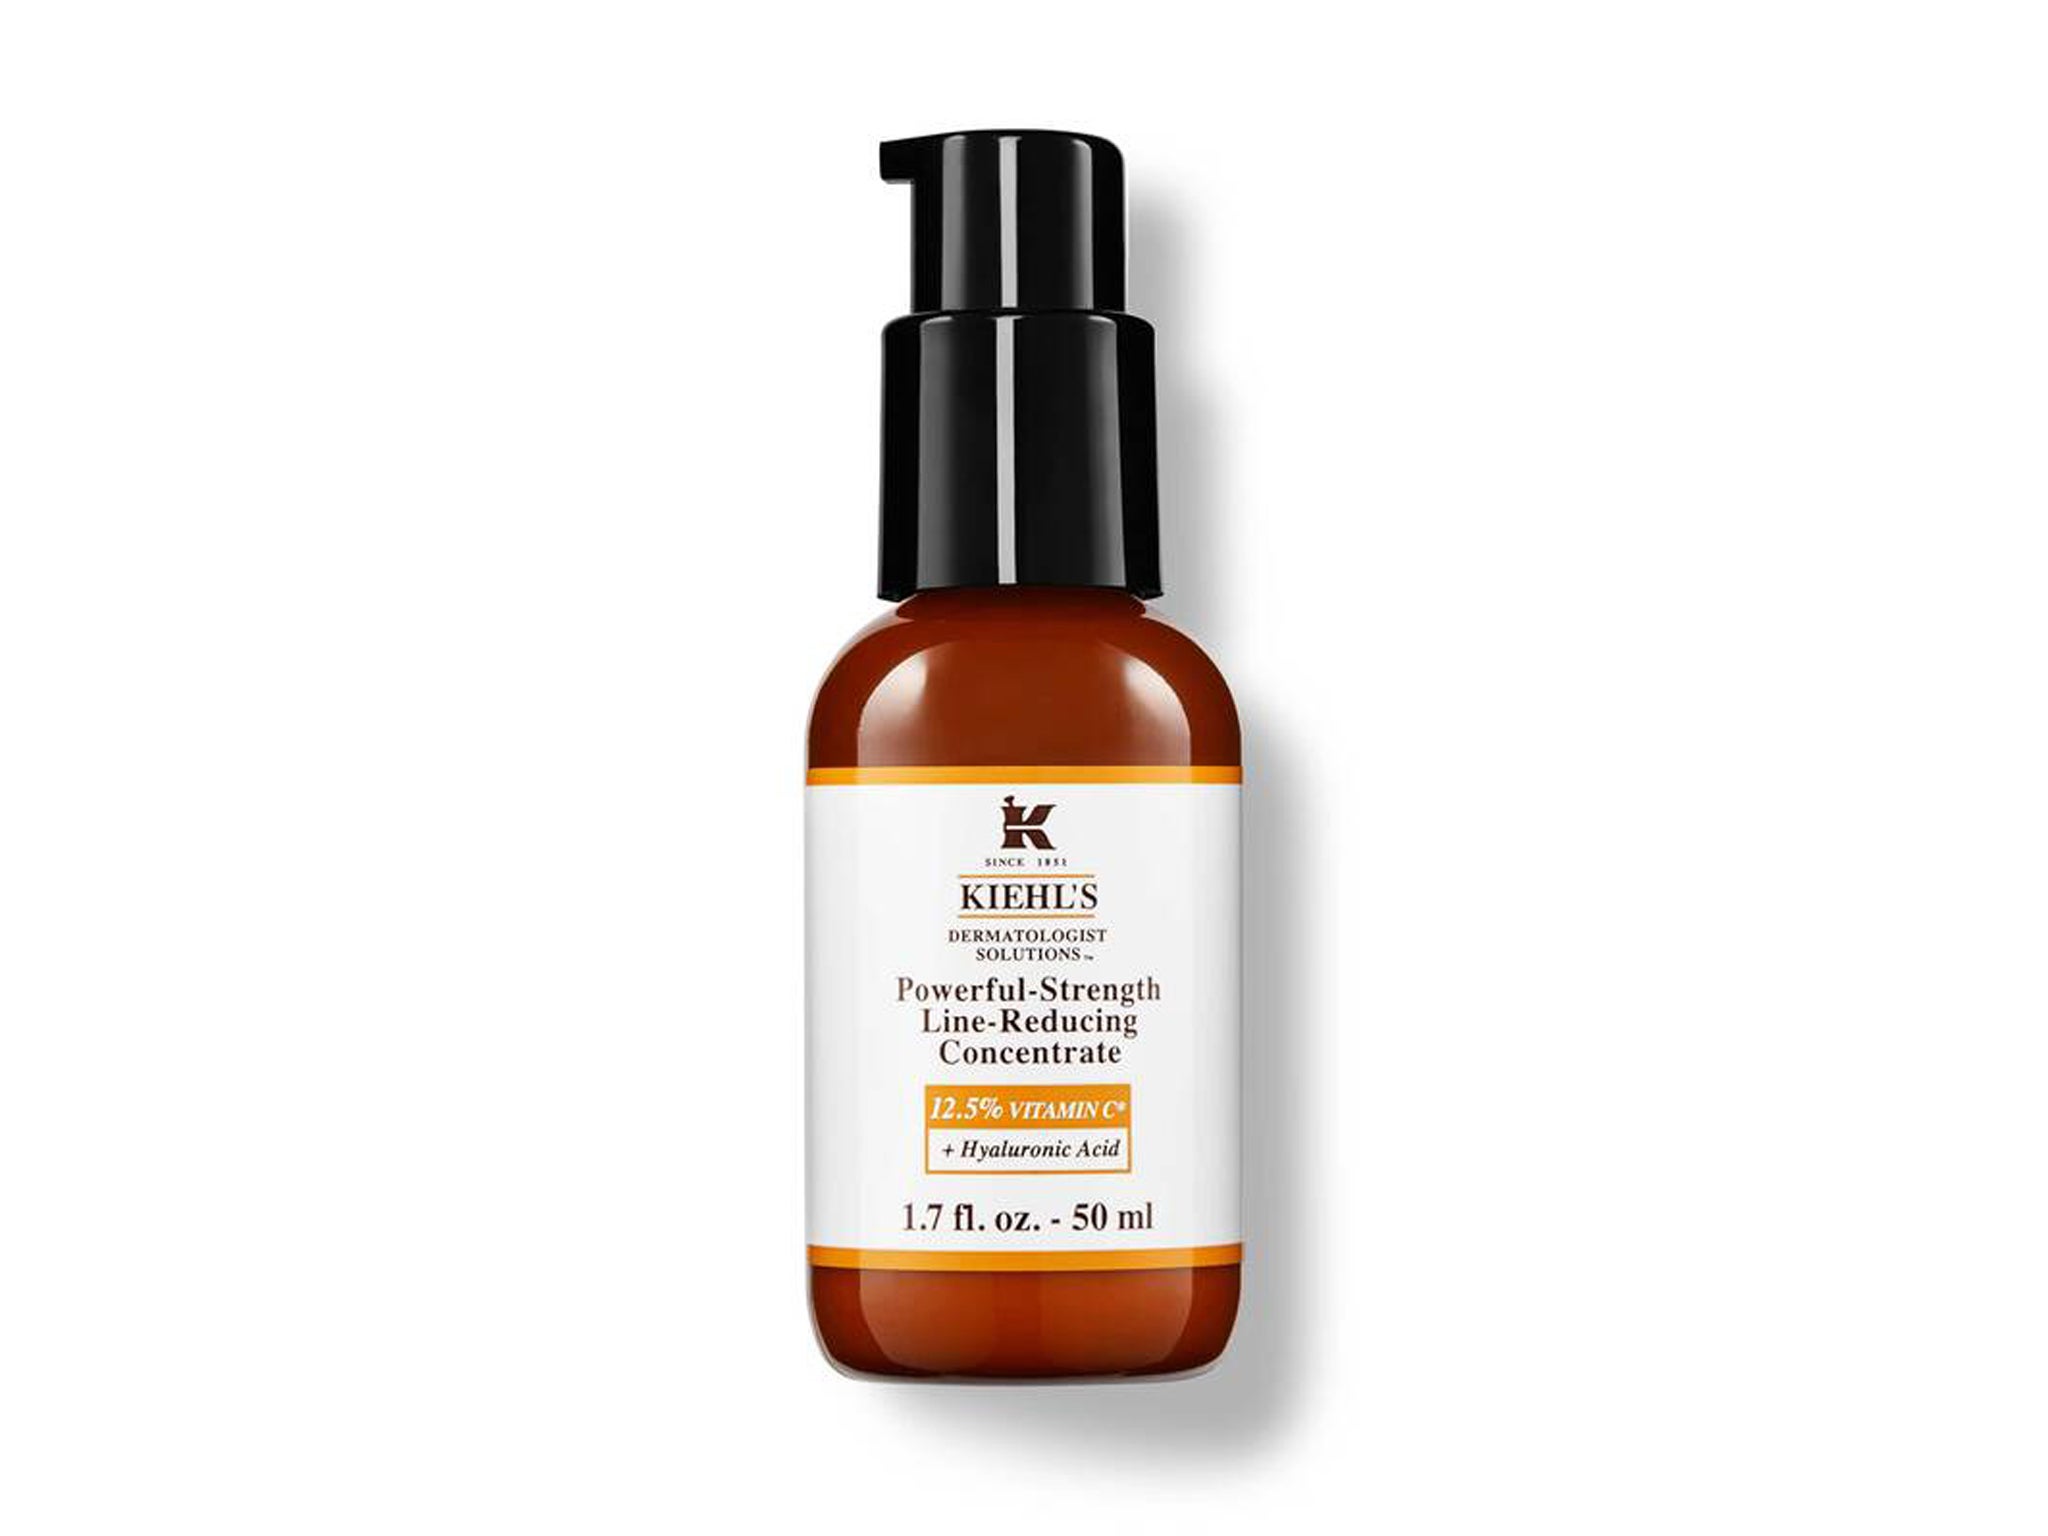 Kiehl's Powerful-Strength Line-Reducing Concentrate.jpg